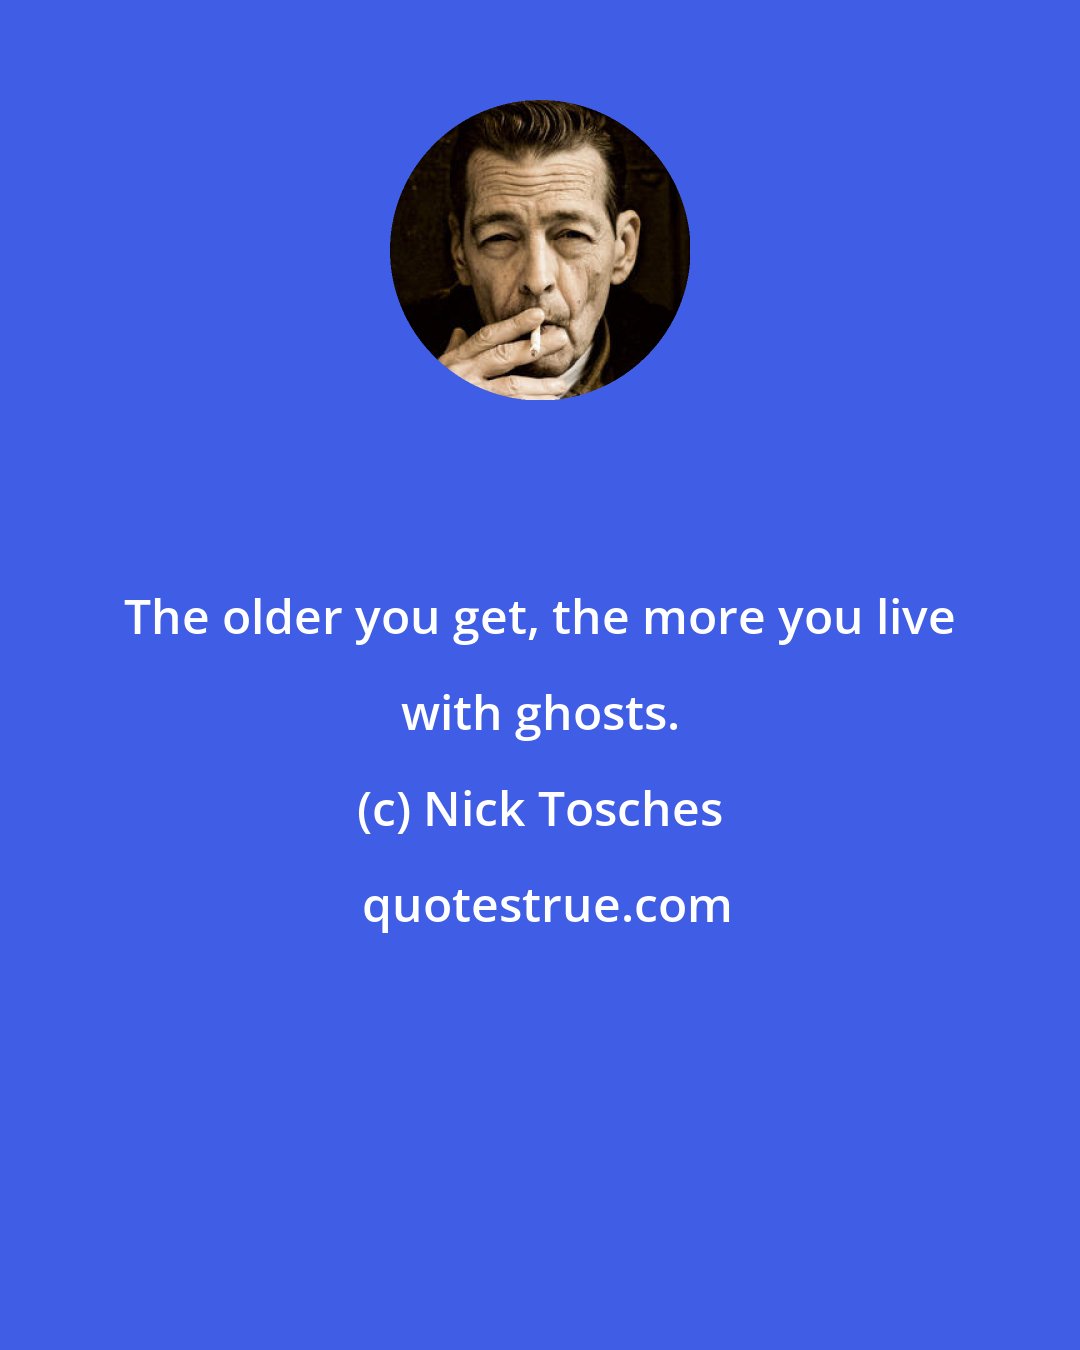 Nick Tosches: The older you get, the more you live with ghosts.